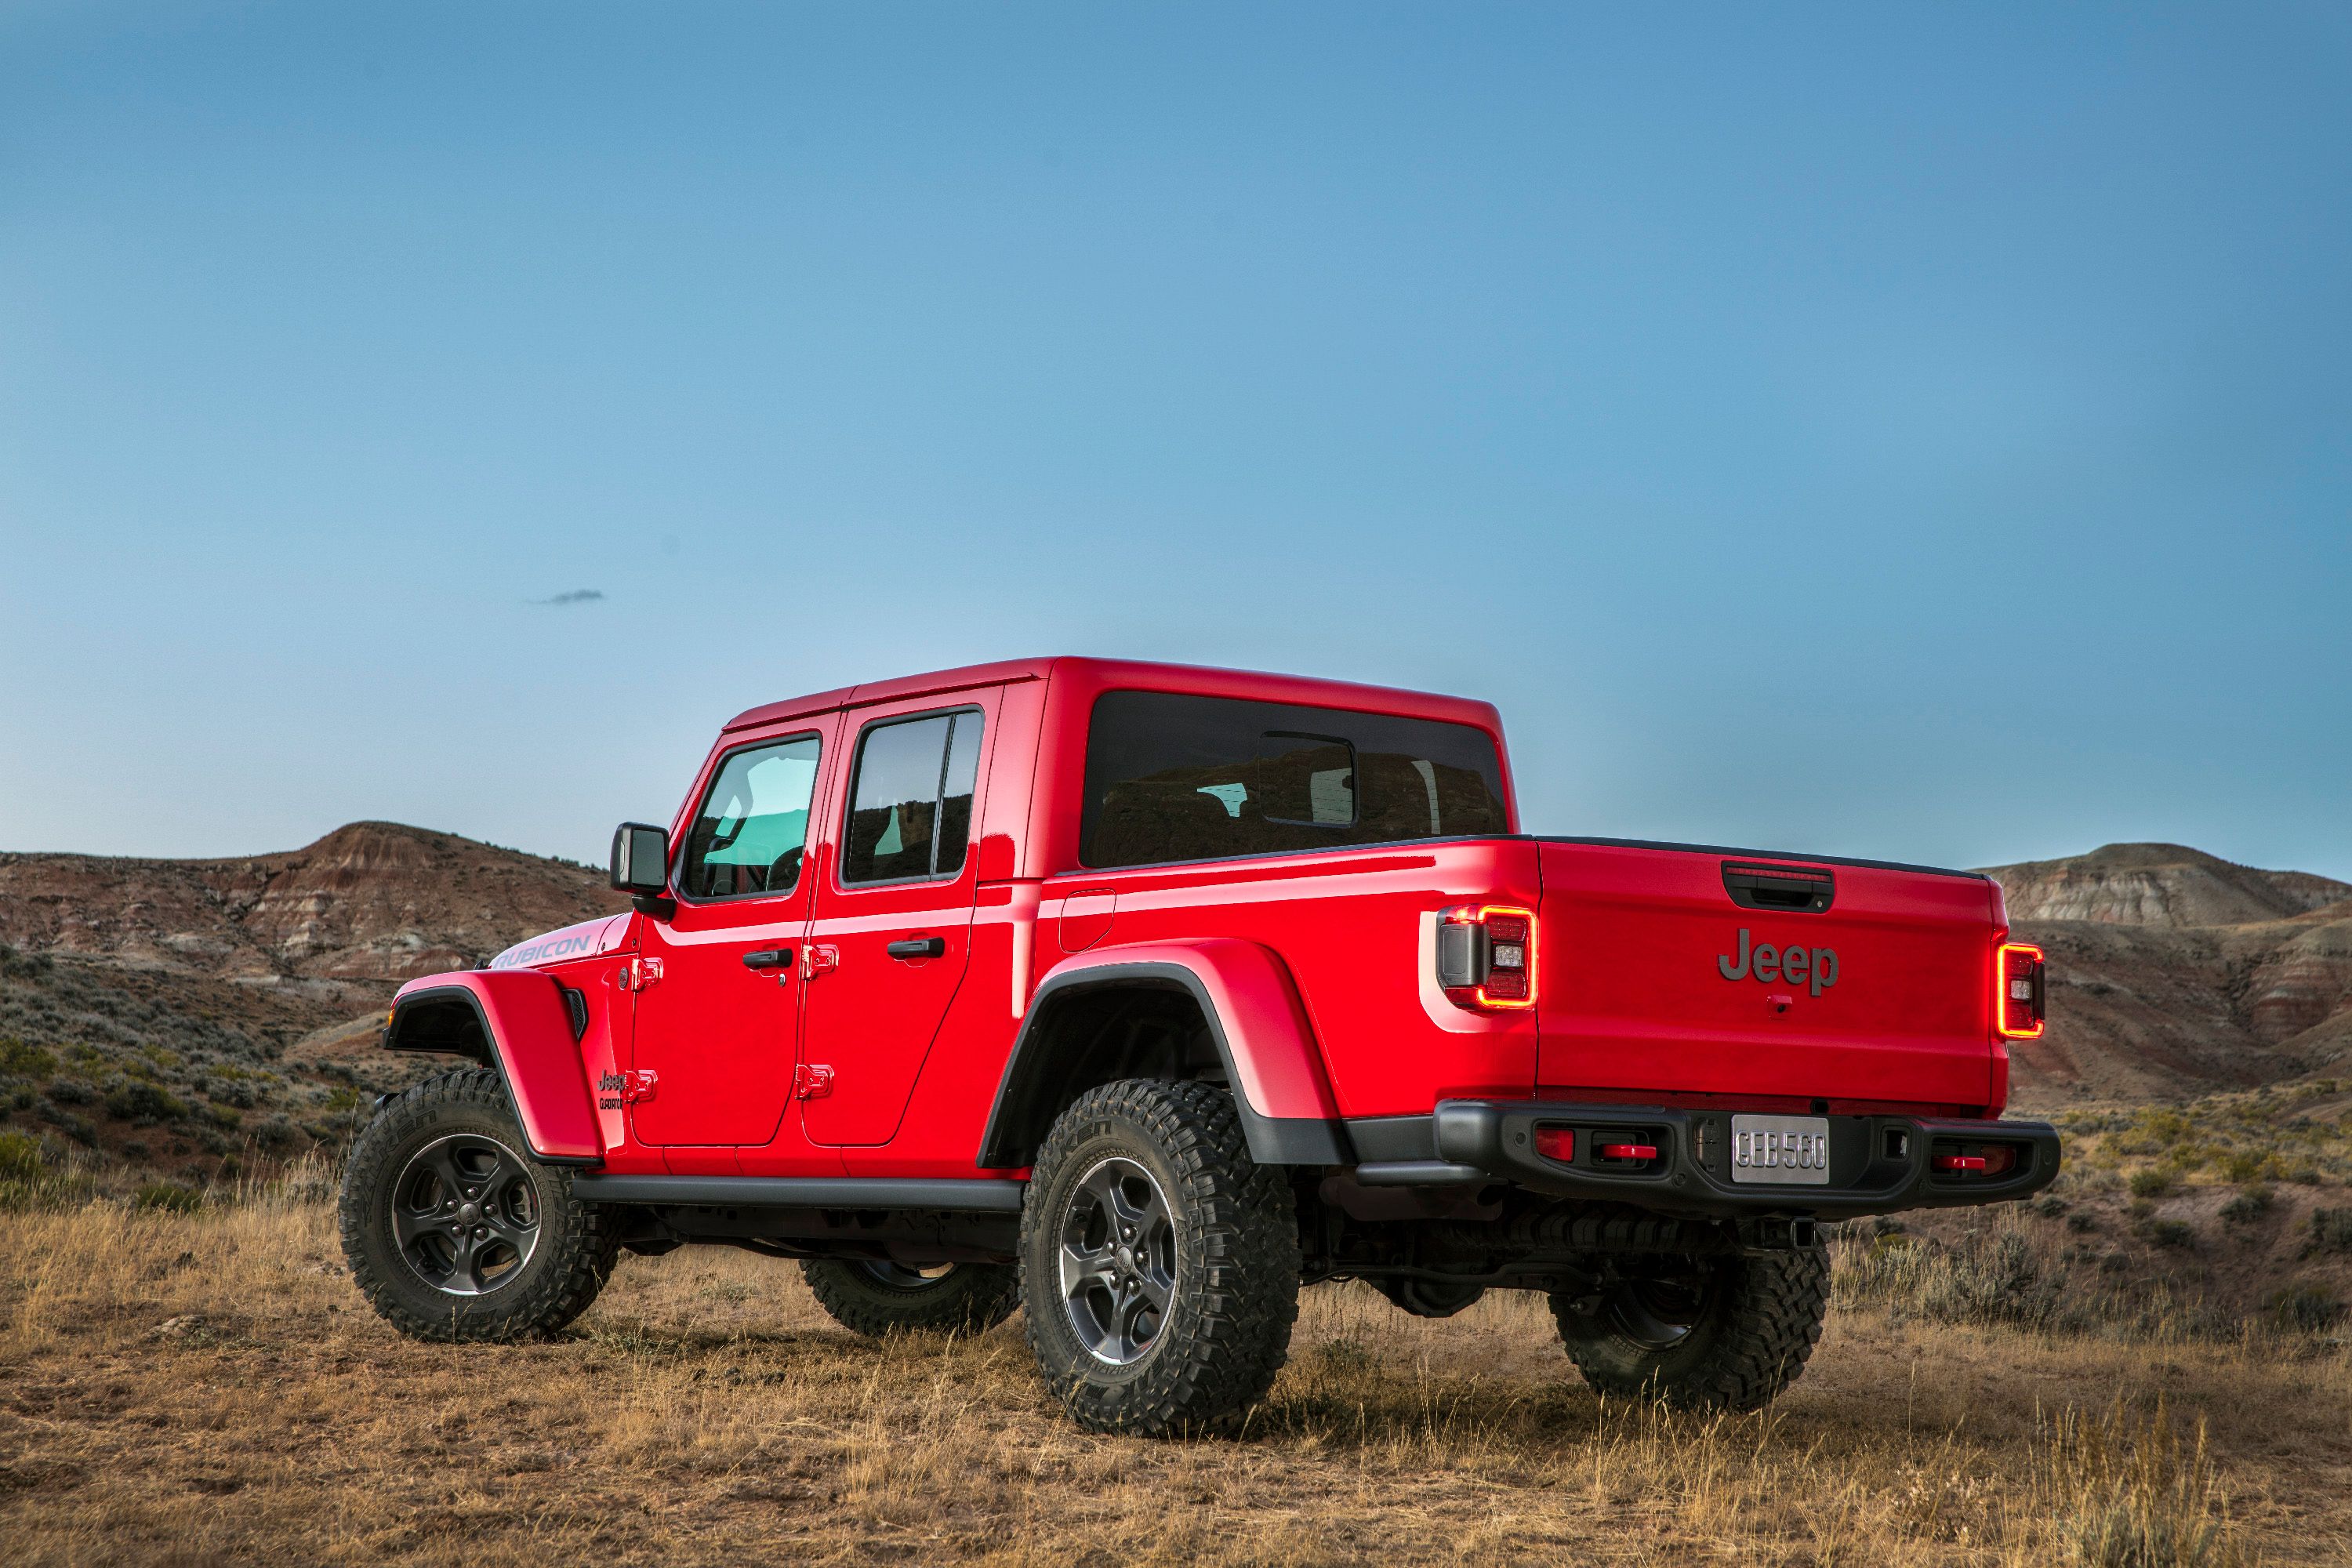 The 2020 Jeep Gladiator Comes to Take on the Chevy Colorado and Toyota Tacoma